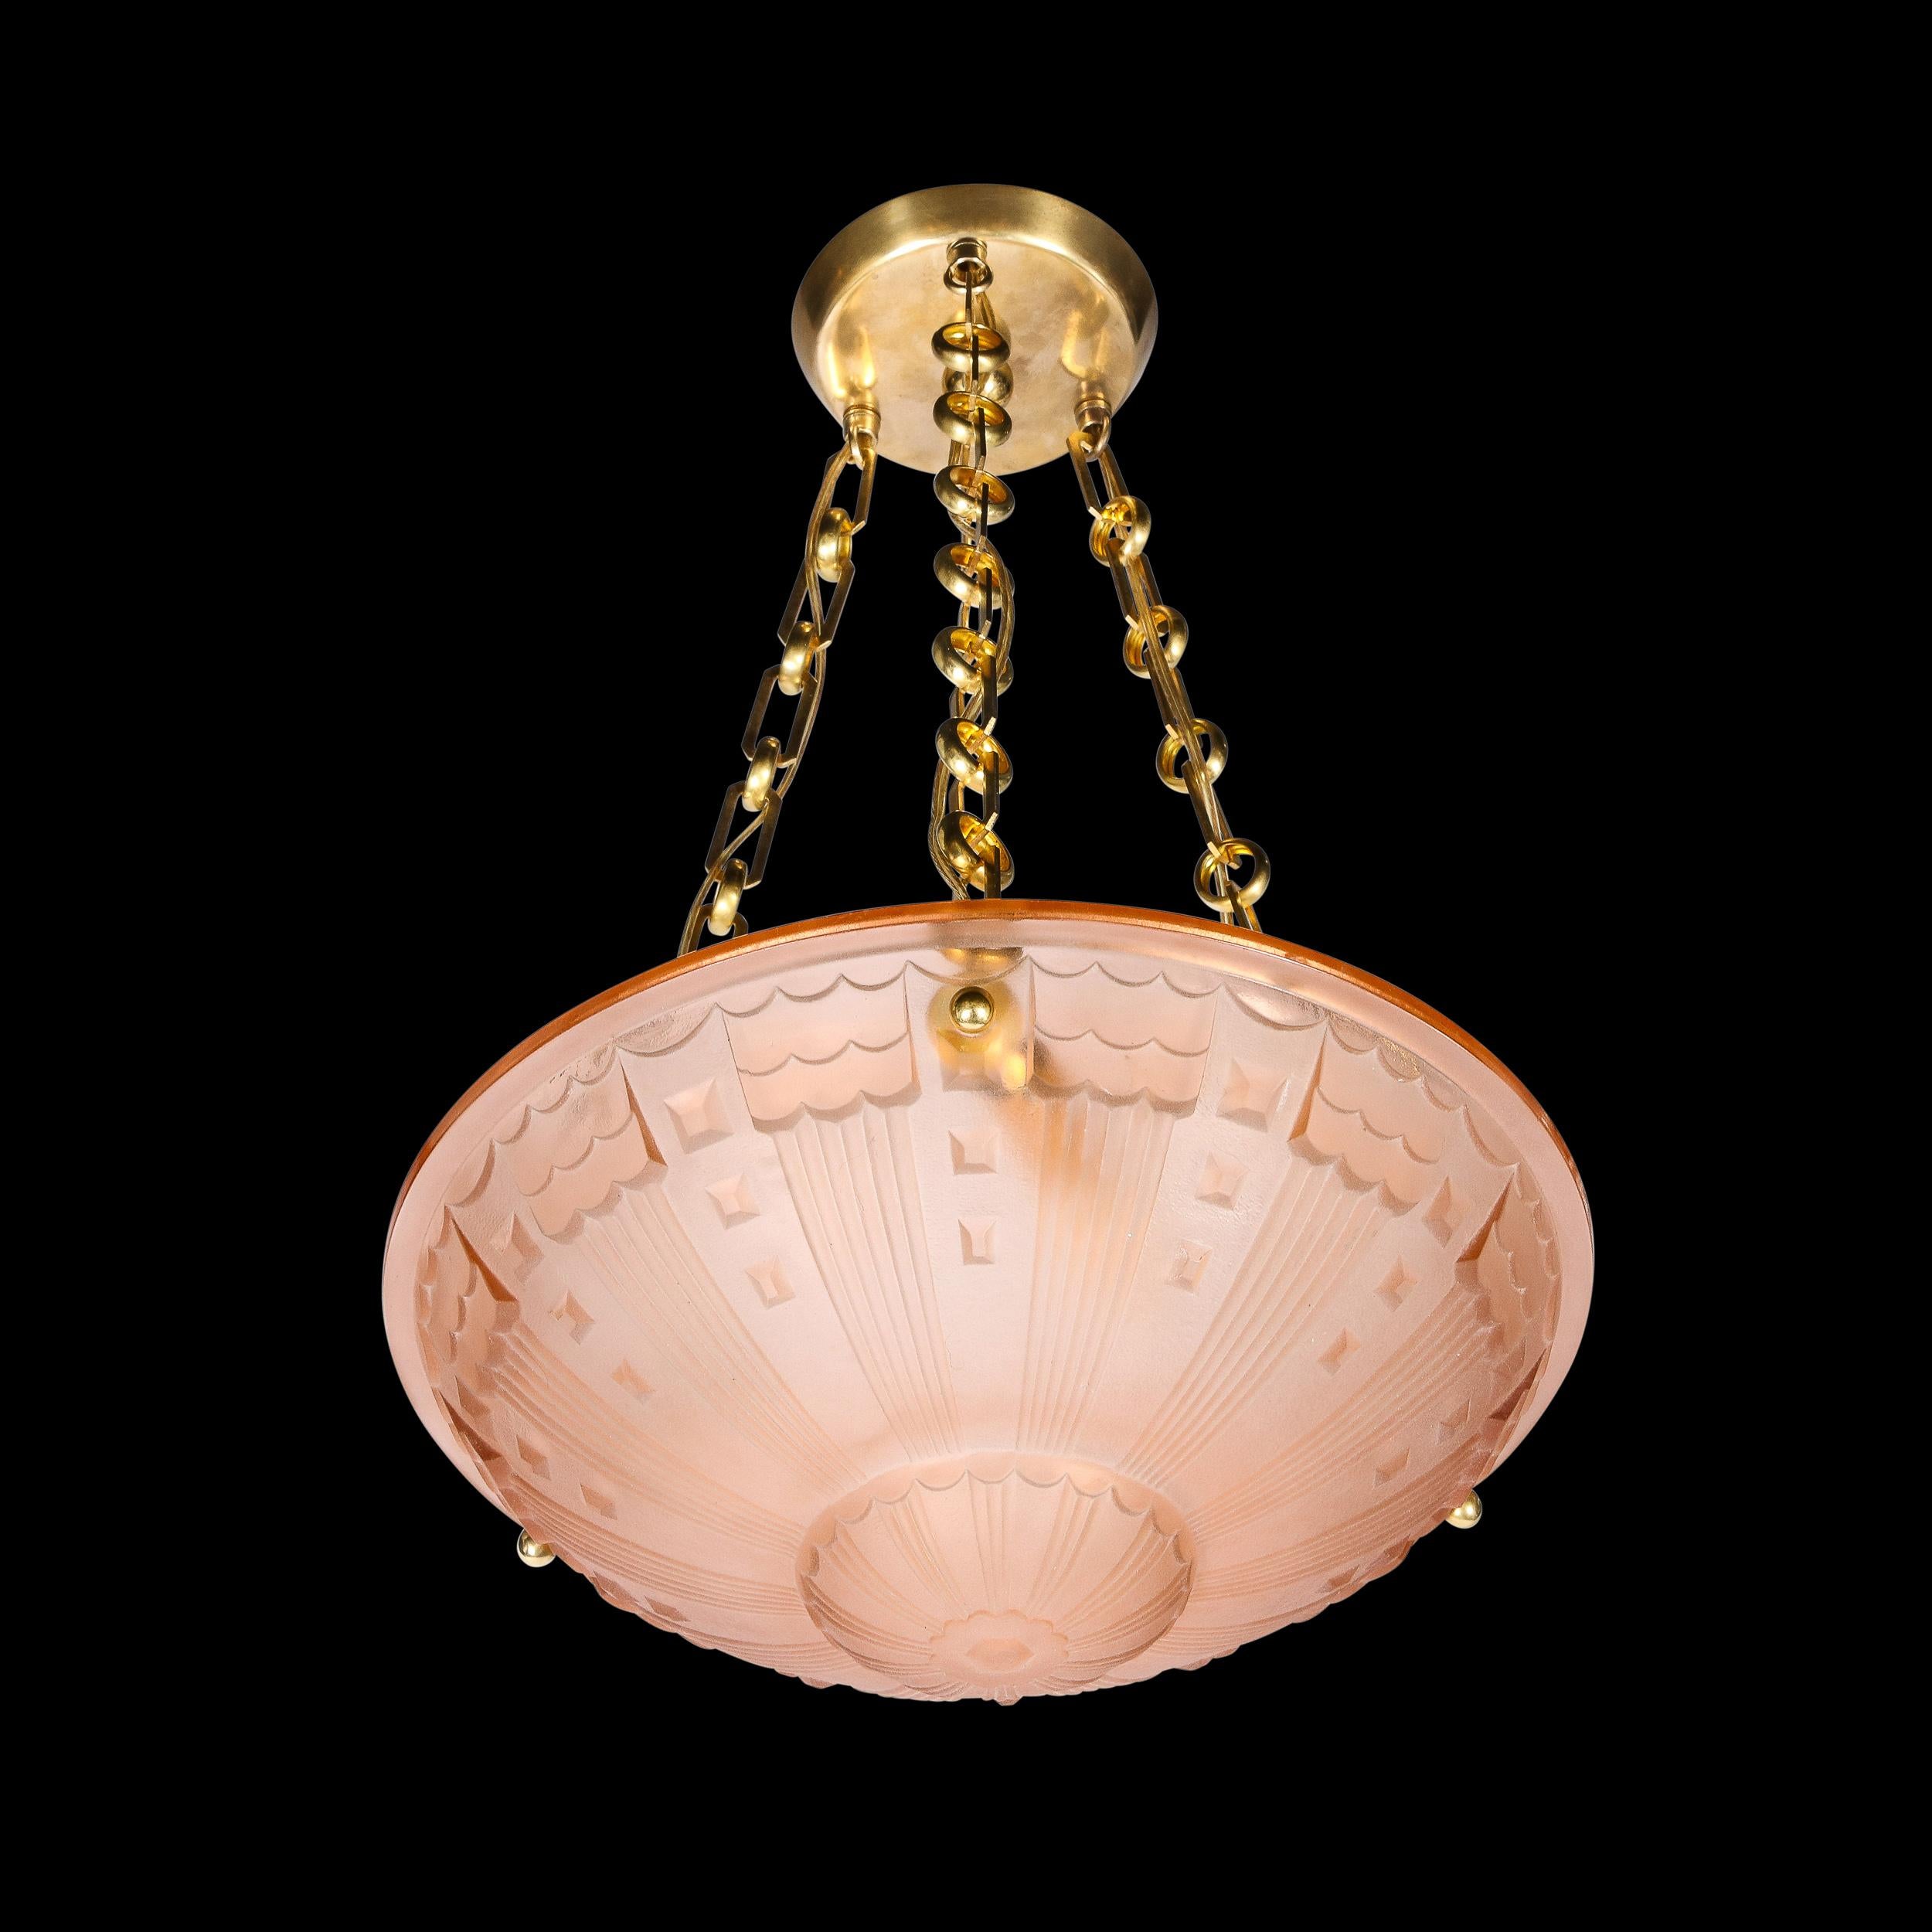 This refined Art Deco Pendant Chandelier in Frosted Rose Glass with Brass Fittings originates from France, Circa 1930. Featuring a stunning hue of molded glass with fluted and Cubist style geometric detailing throughout, the piece is suspended by